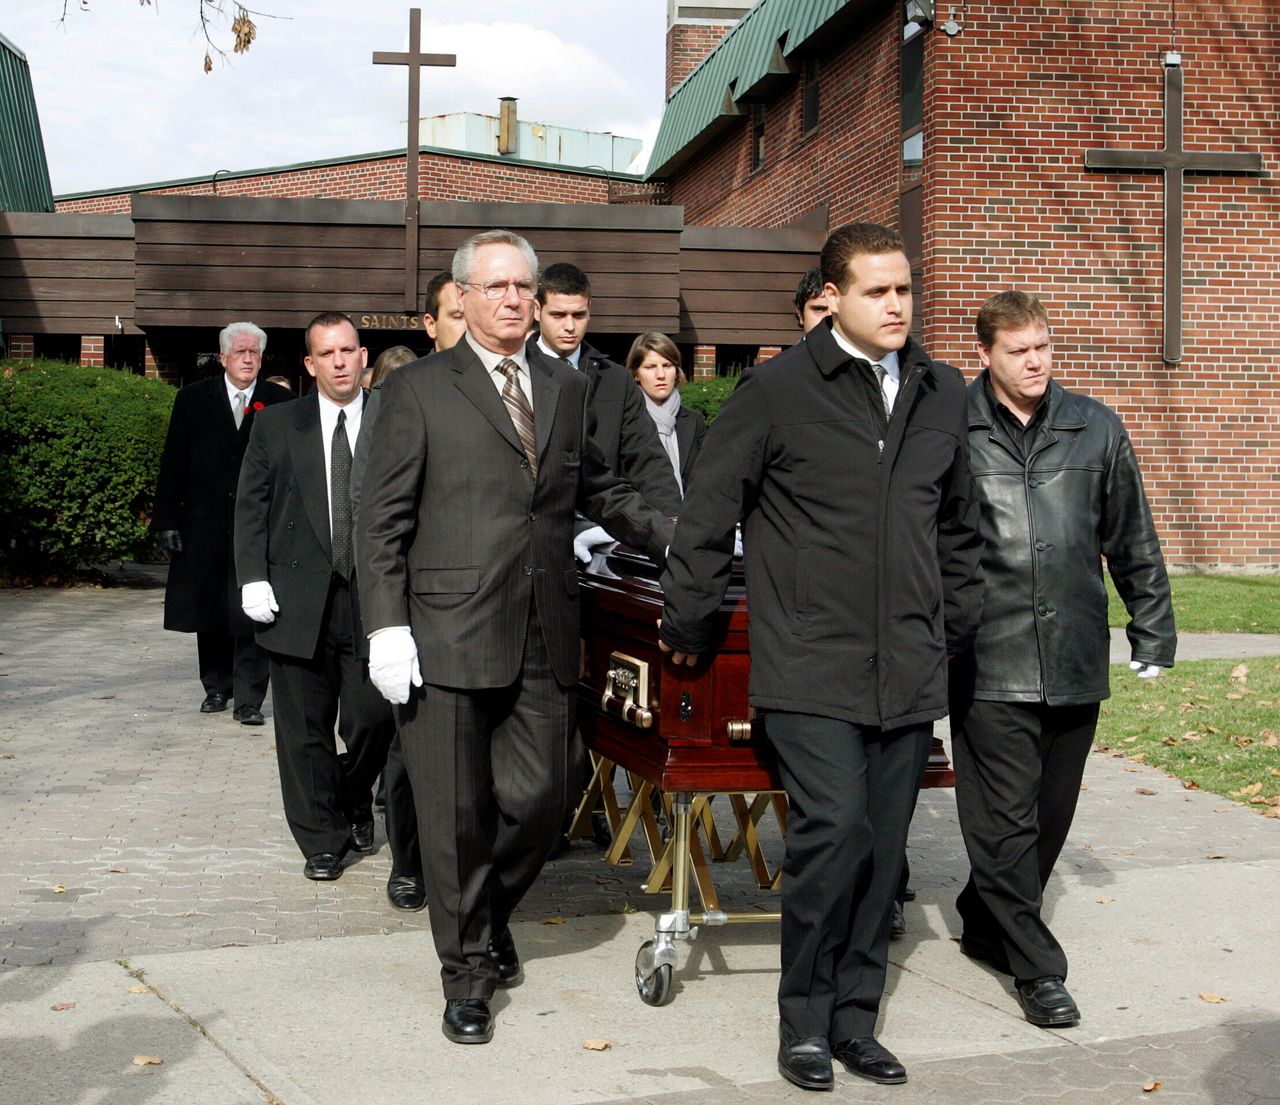 Pallbearers walk with the casket after funeral services for 13-year-old Evan Frustaglio in Toronto on Nov. 2, 2009. Frustaglio passed away after contracting the H1N1 virus. The boy's sudden death triggered widespread public concern, and families flocked to hospitals and health clinics to be vaccinated against the H1N1 virus.